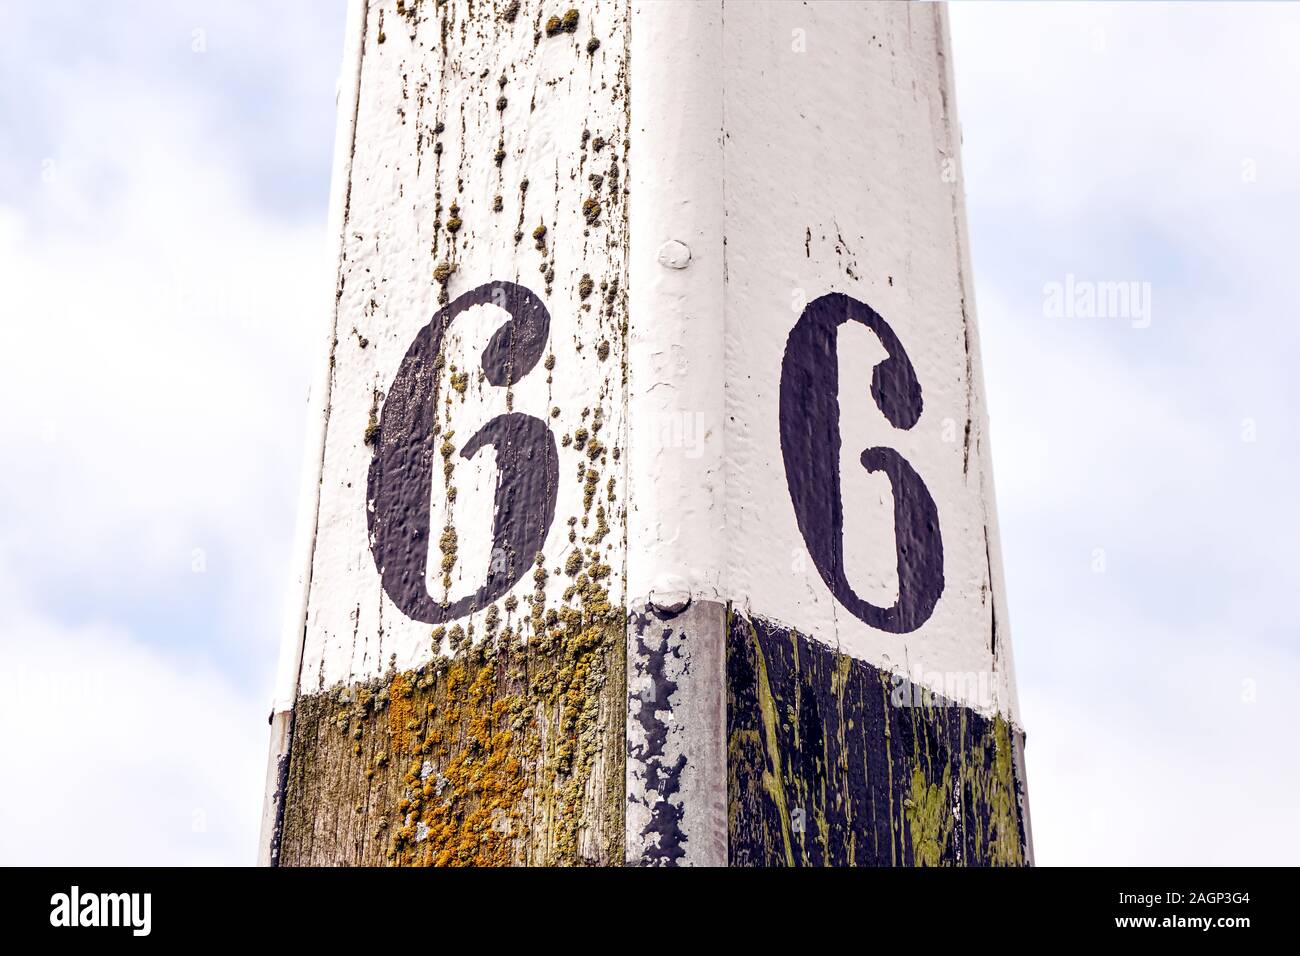 Horizontal image of an old weathered mooring post with number six painted on each side against a cloudy sky Stock Photo